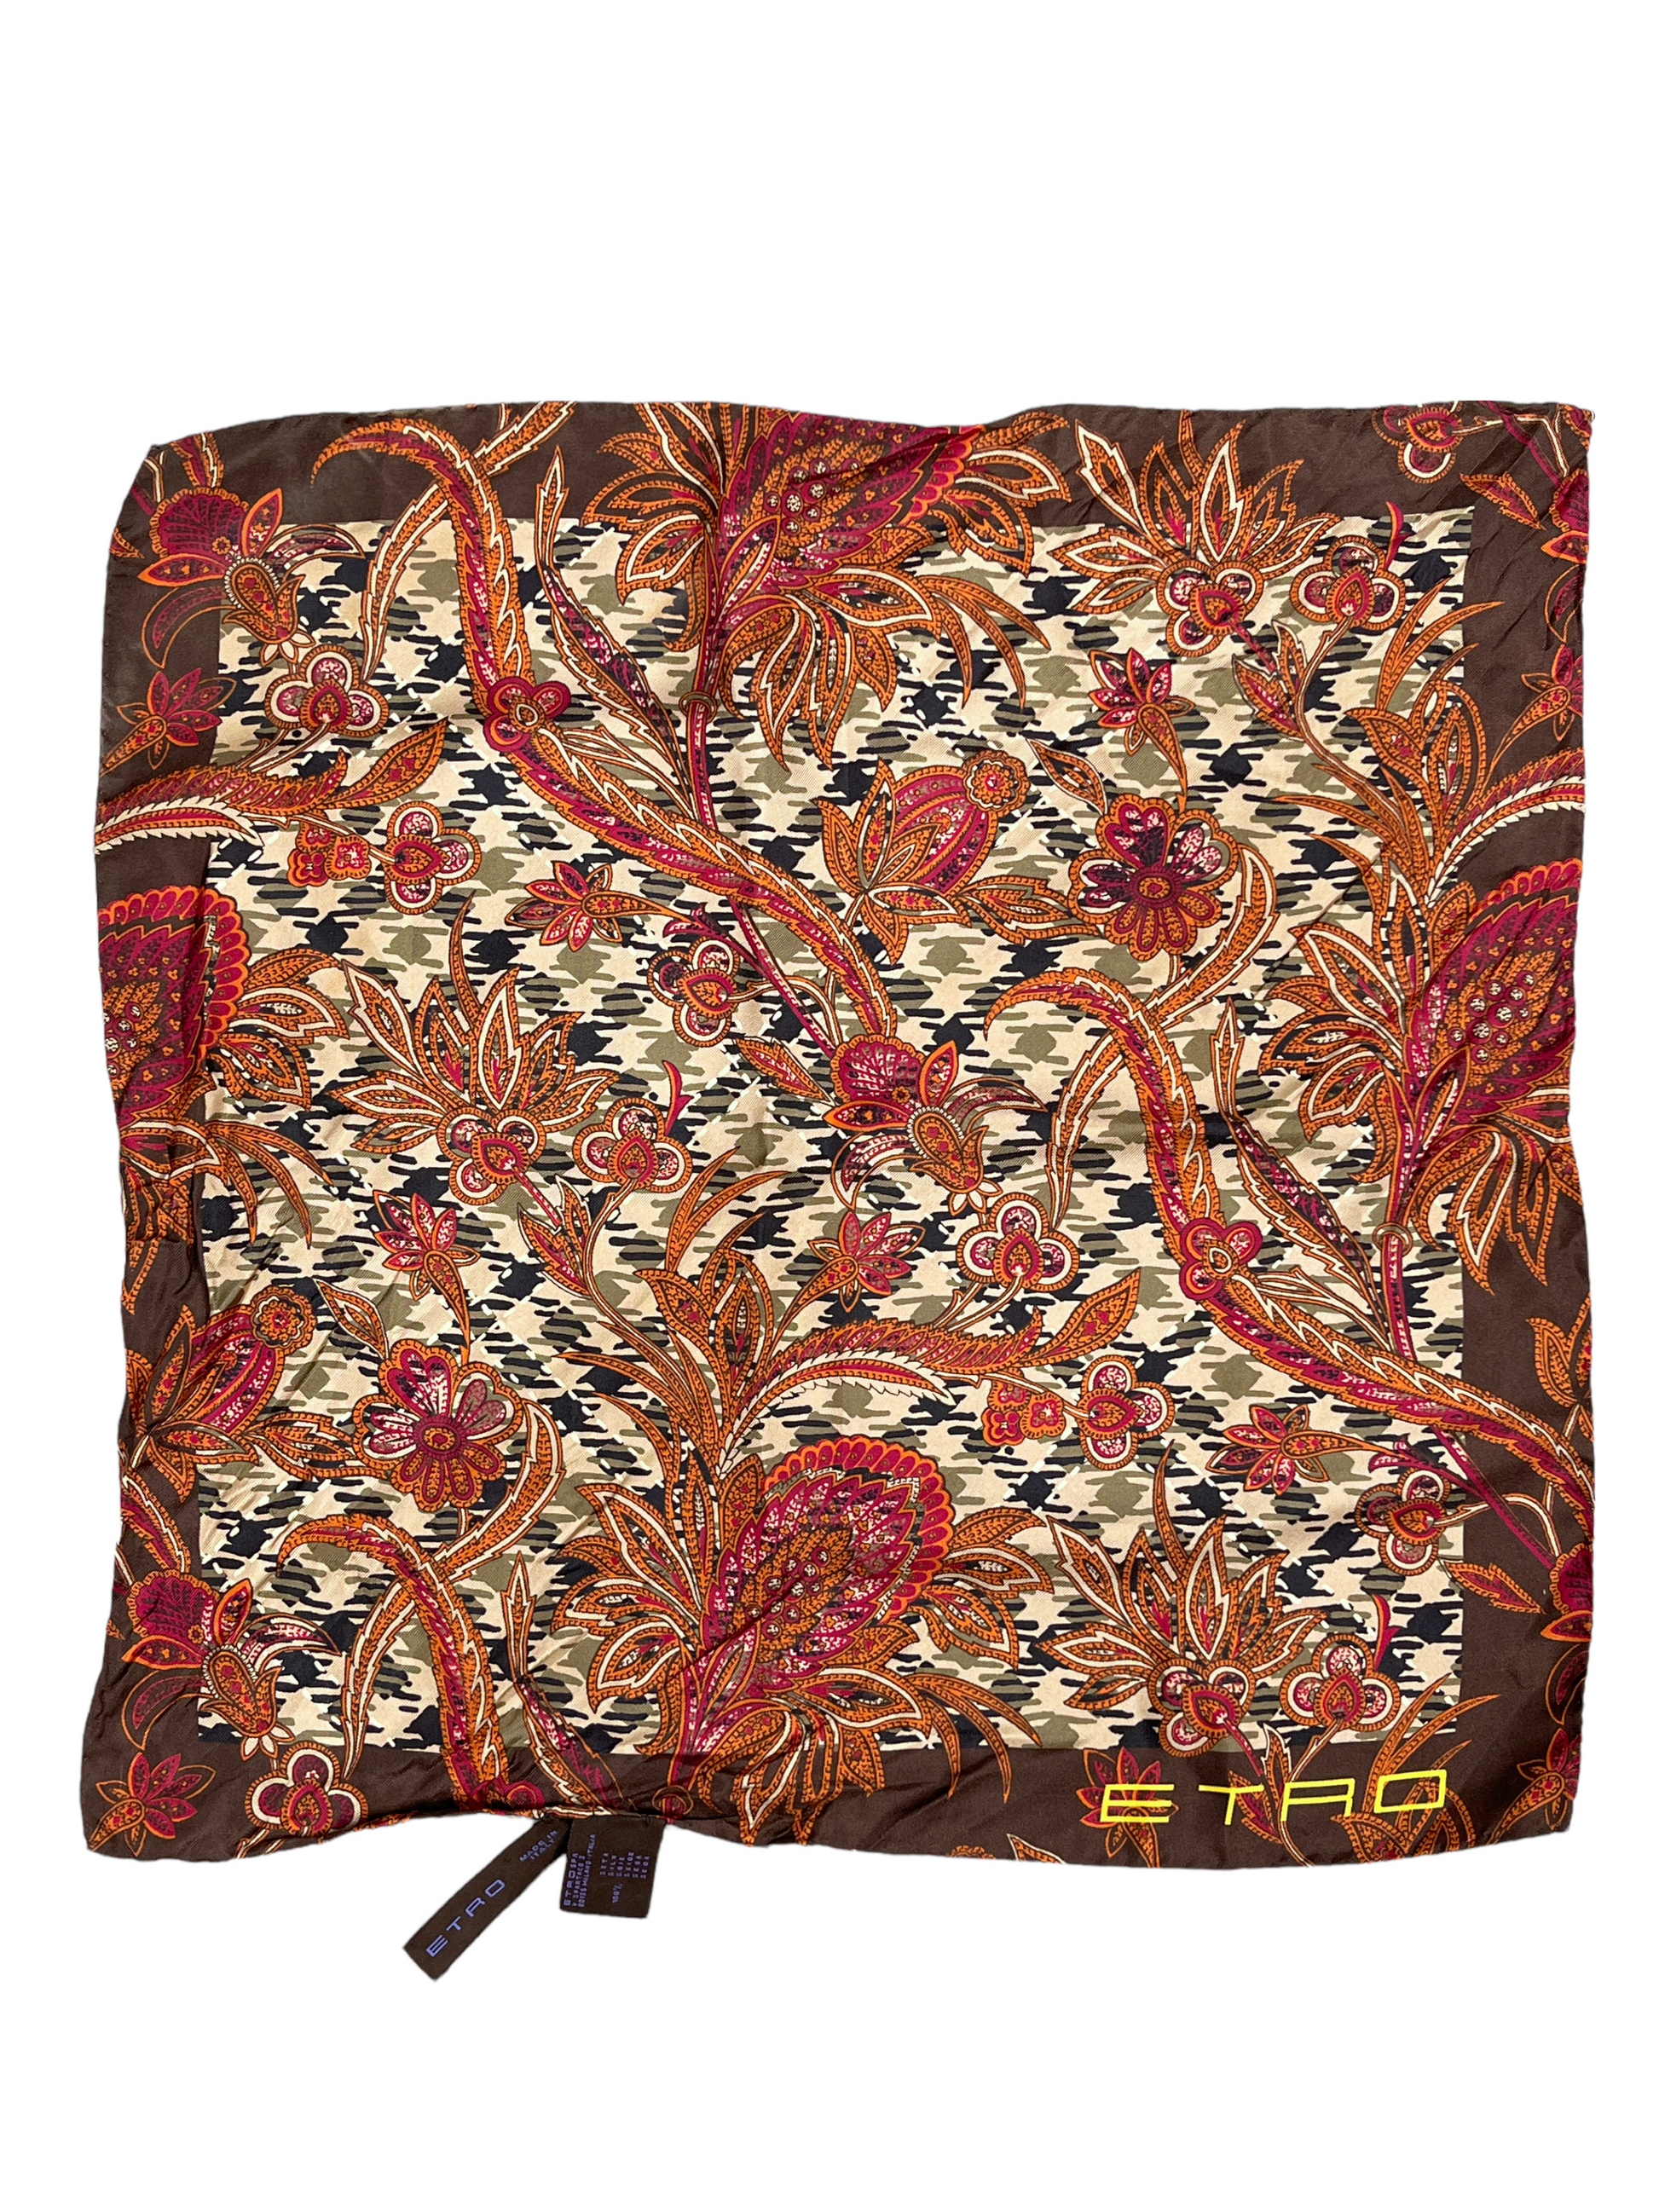 Etro Milano Brown Beige Paisley Houndstooth Silk Pocket Square Scarf — Genuine Design Luxury Consignment for Men. New & Pre-Owned Clothing, Shoes, & Accessories. Calgary, Canada